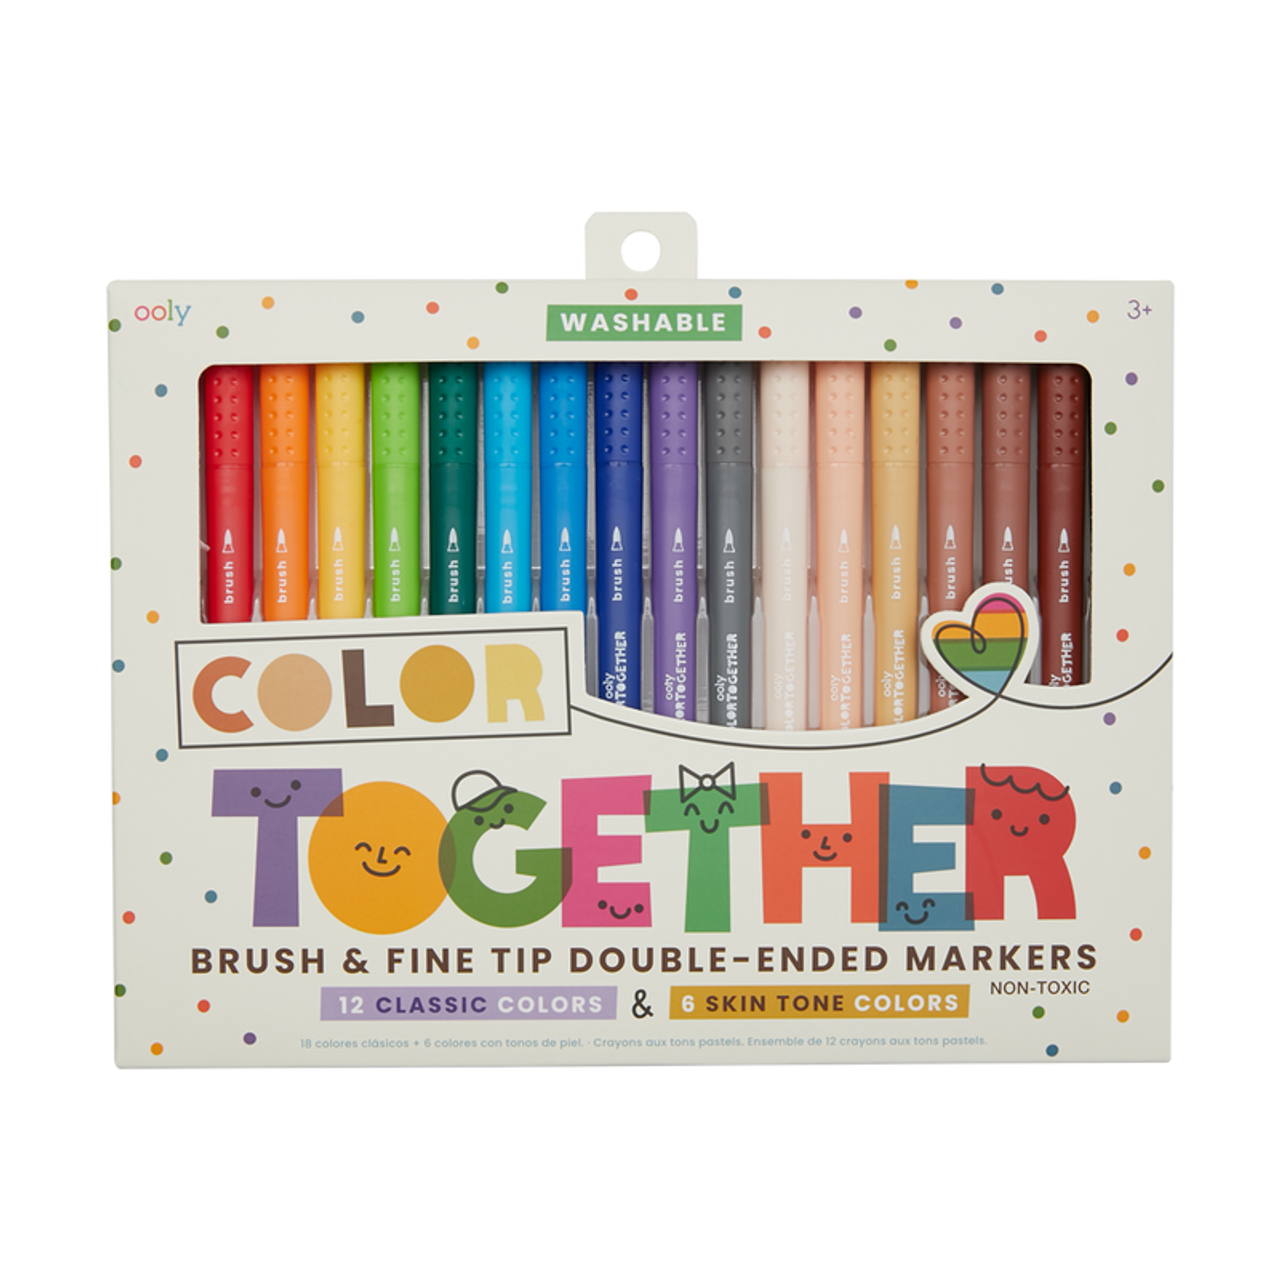 https://cdn11.bigcommerce.com/s-9e0eaxeq07/images/stencil/1280x1280/products/414/1315/130-099-Color-Together-Markers-Set-of-18-C1_800x800__93833.1661990354.png?c=1